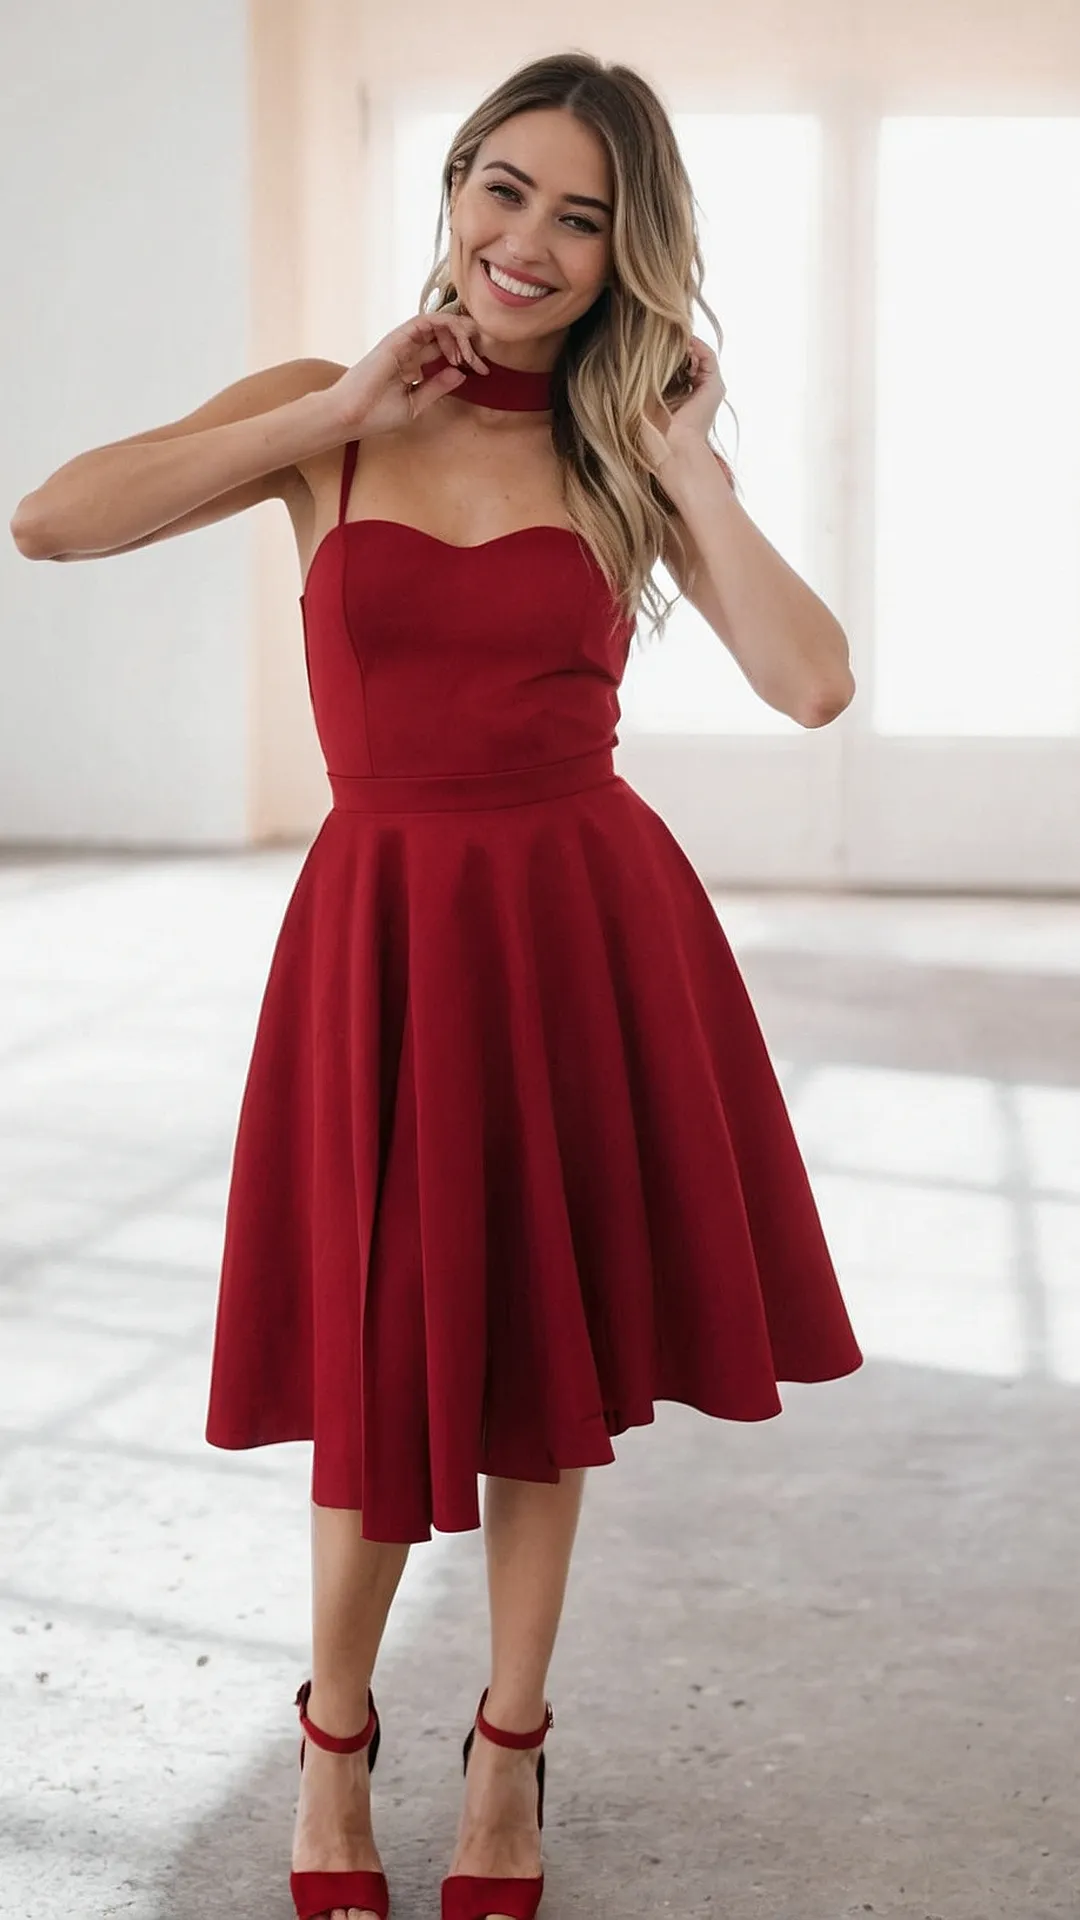 Lady in Red: Chic and Trendy Outfit Ideas